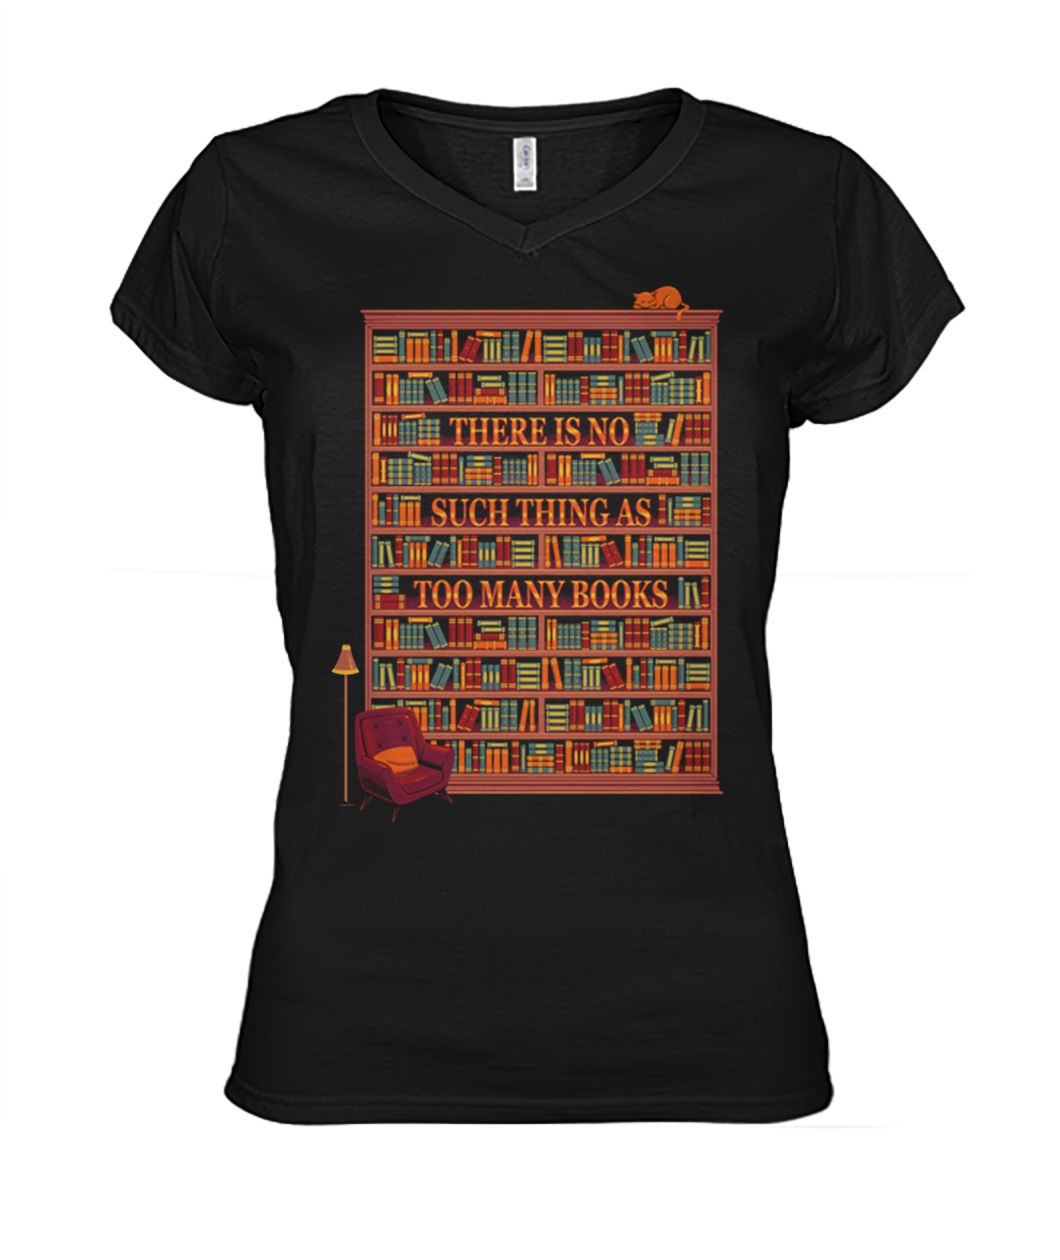 There is no such thing as too many books women's v-neck